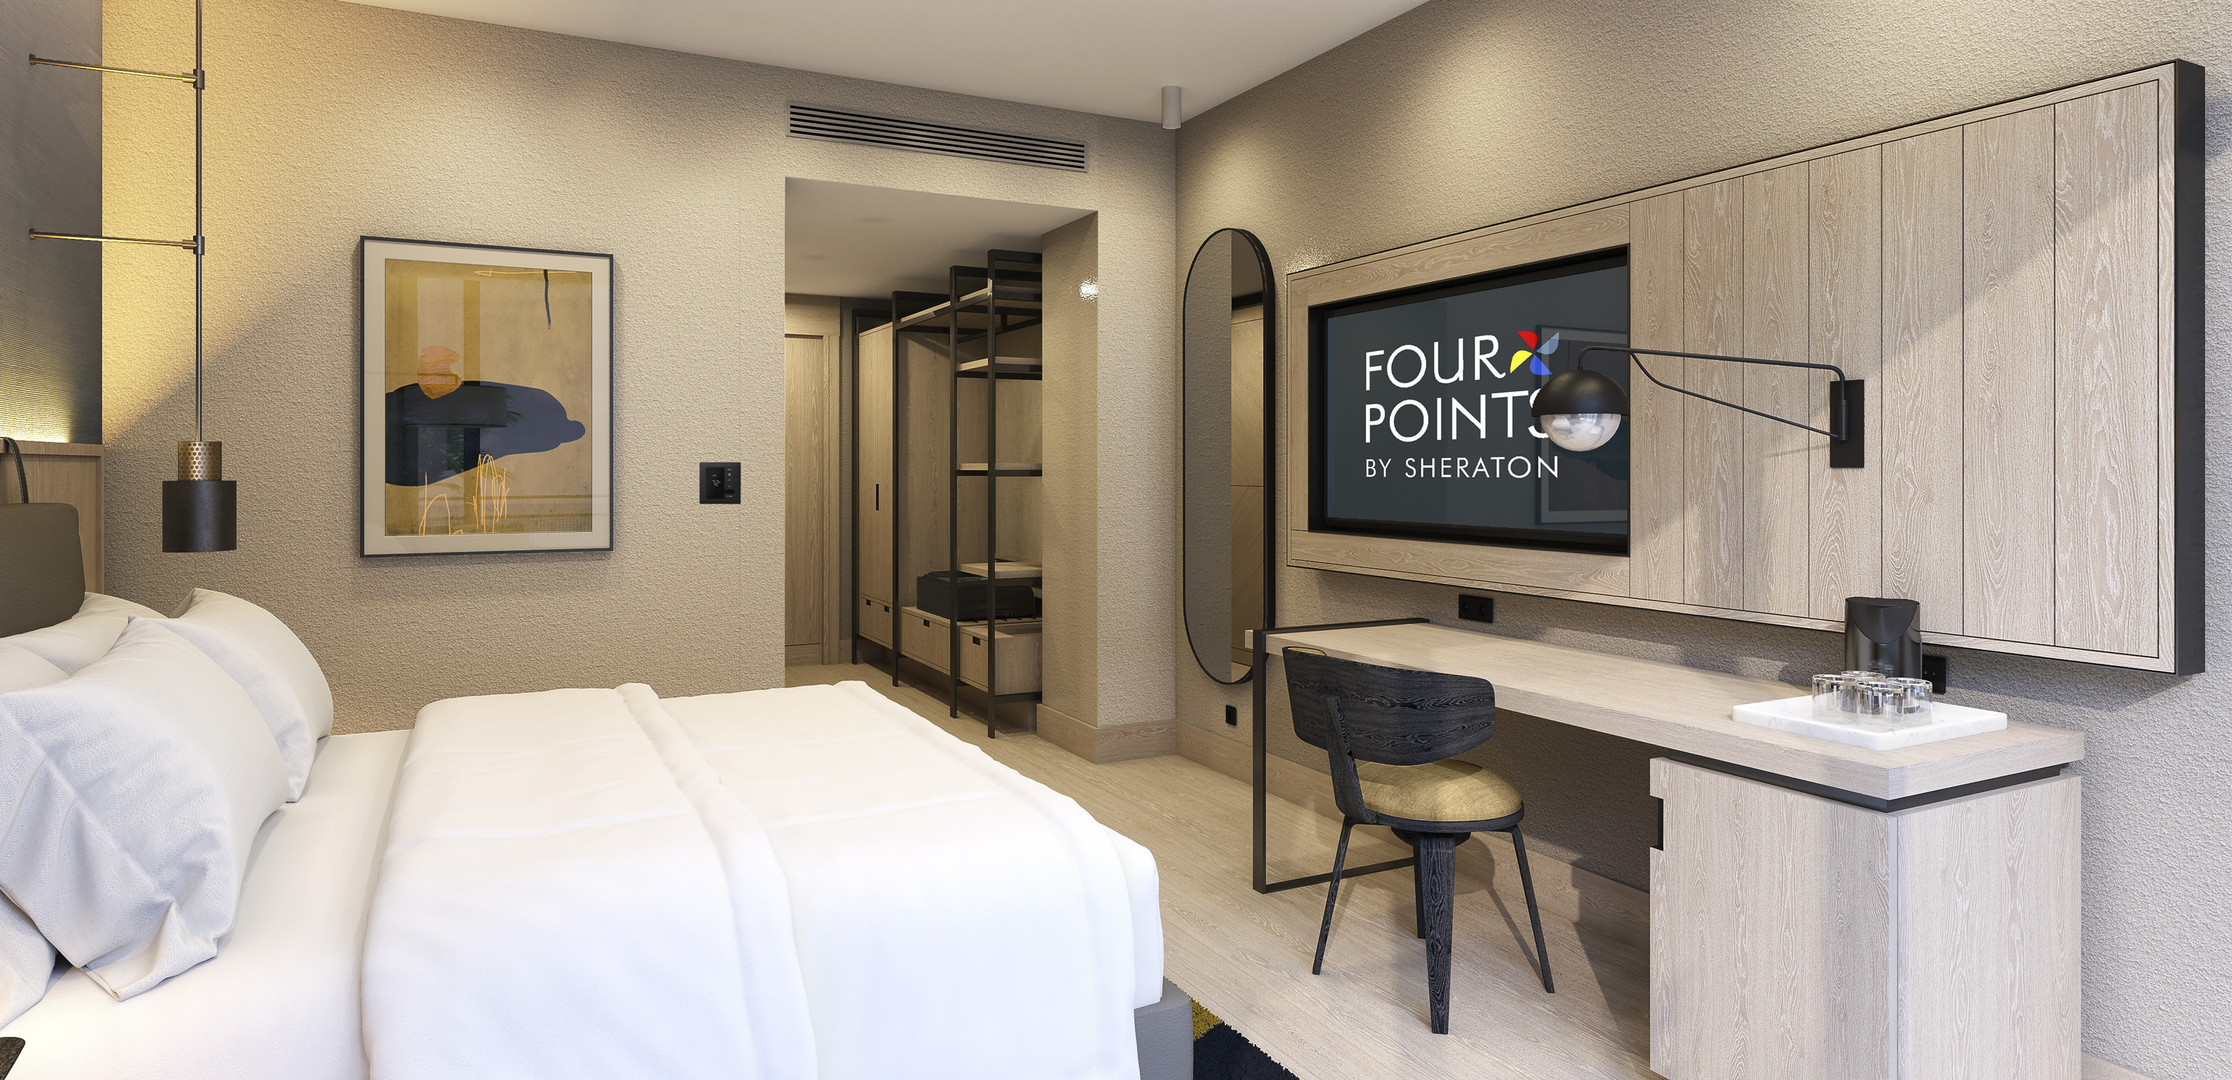 Four Points by Sheraton 13